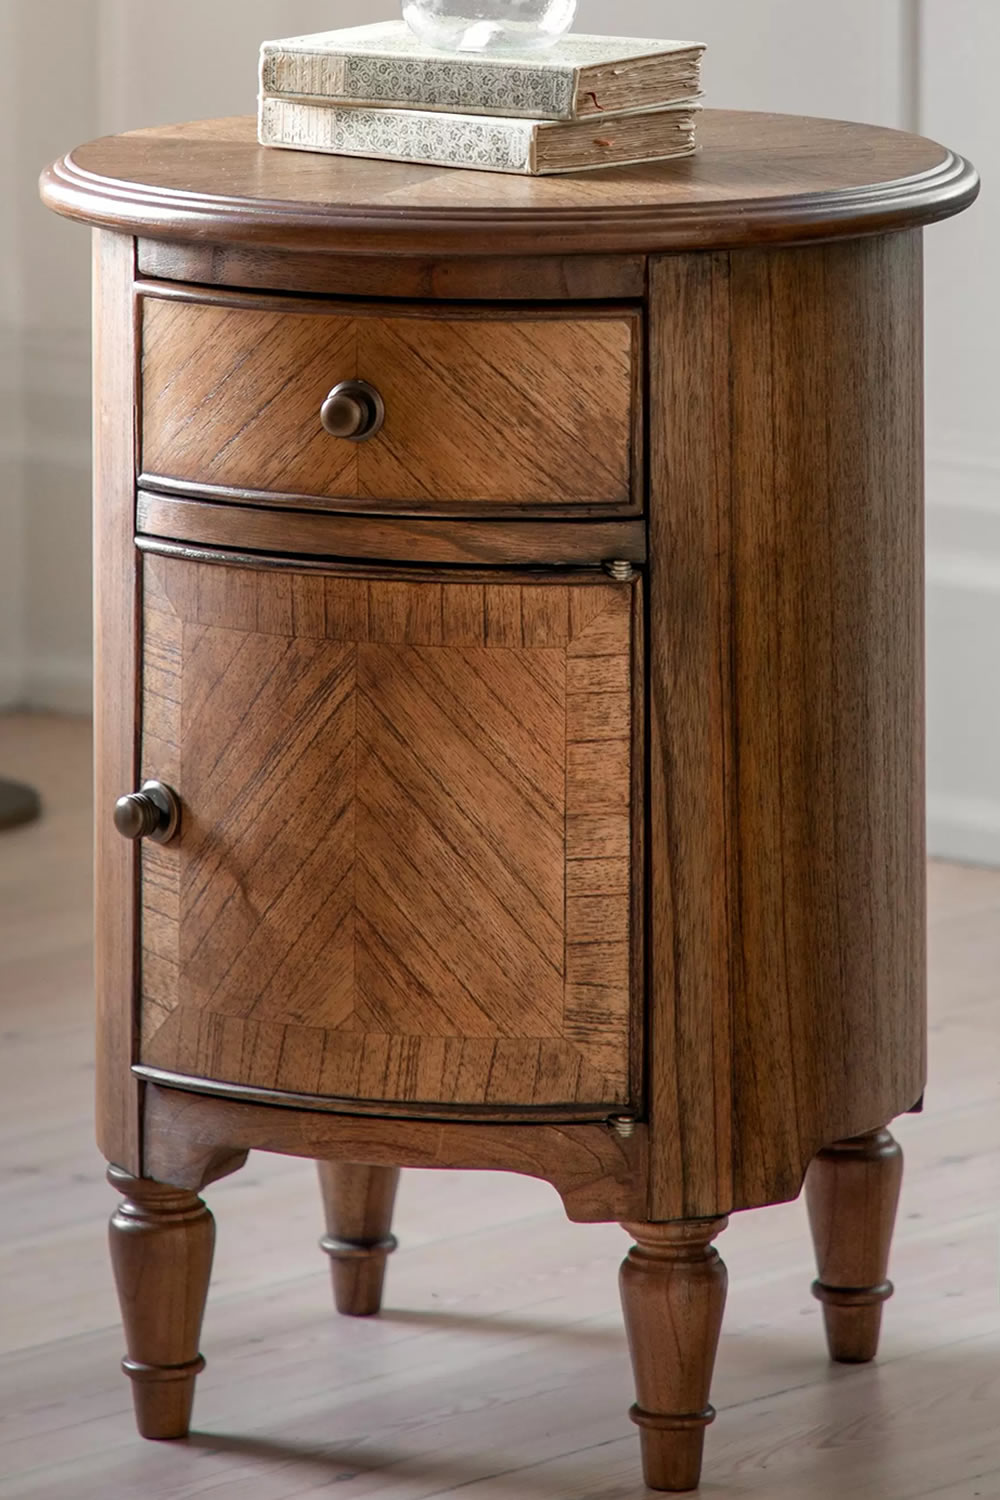 View Highgrove Round Antique Brown Wooden Side Table With Storage 1 Drawer 1 Large Cupboard Crafted From Mindi Wood With Marquetry Inlaid Details information